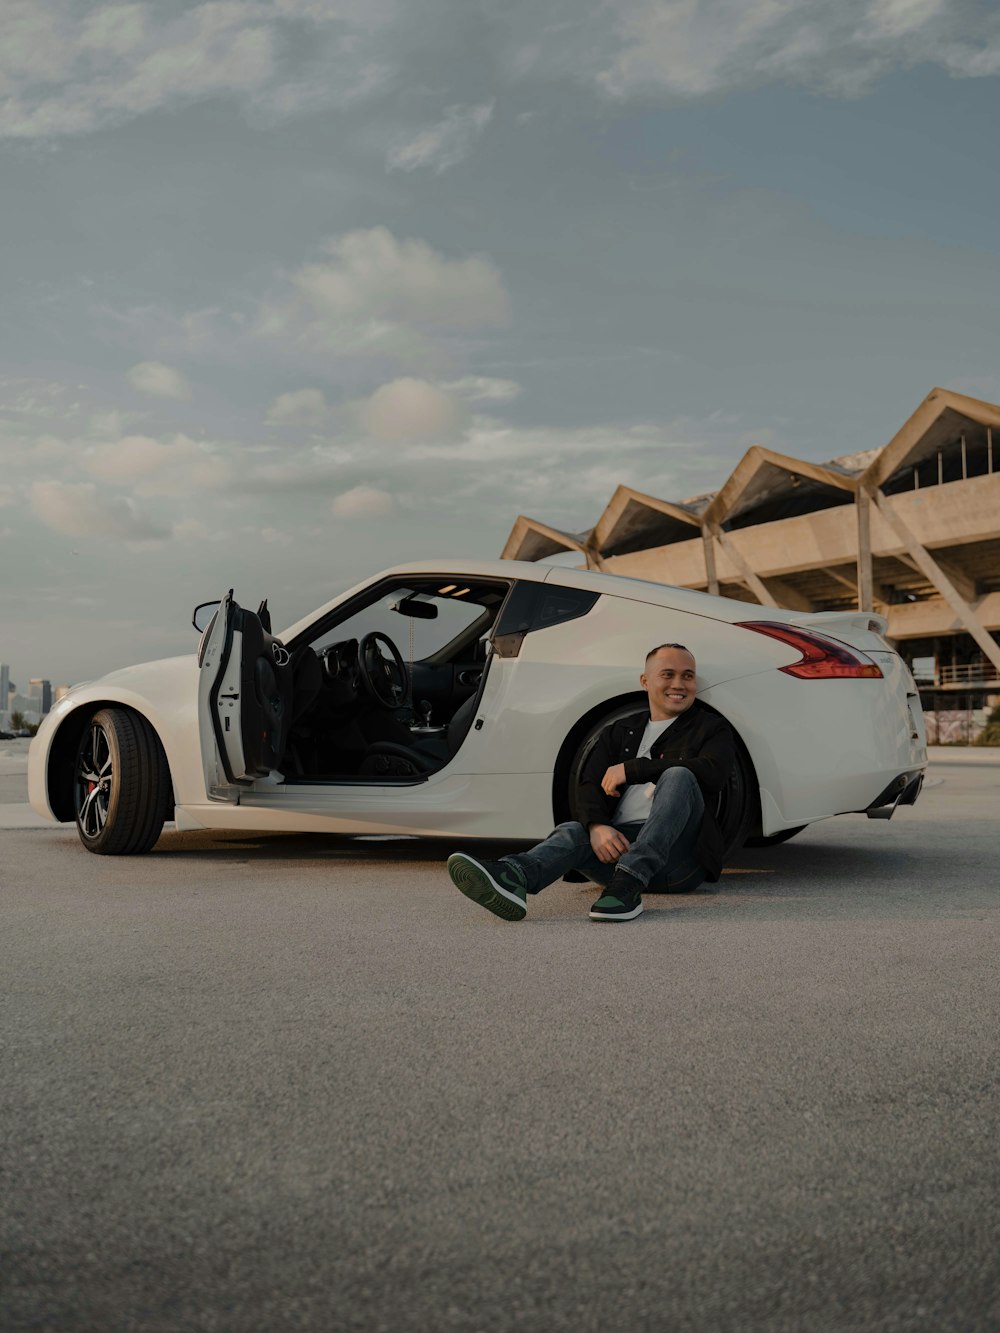 a man sitting on the ground next to a white sports car